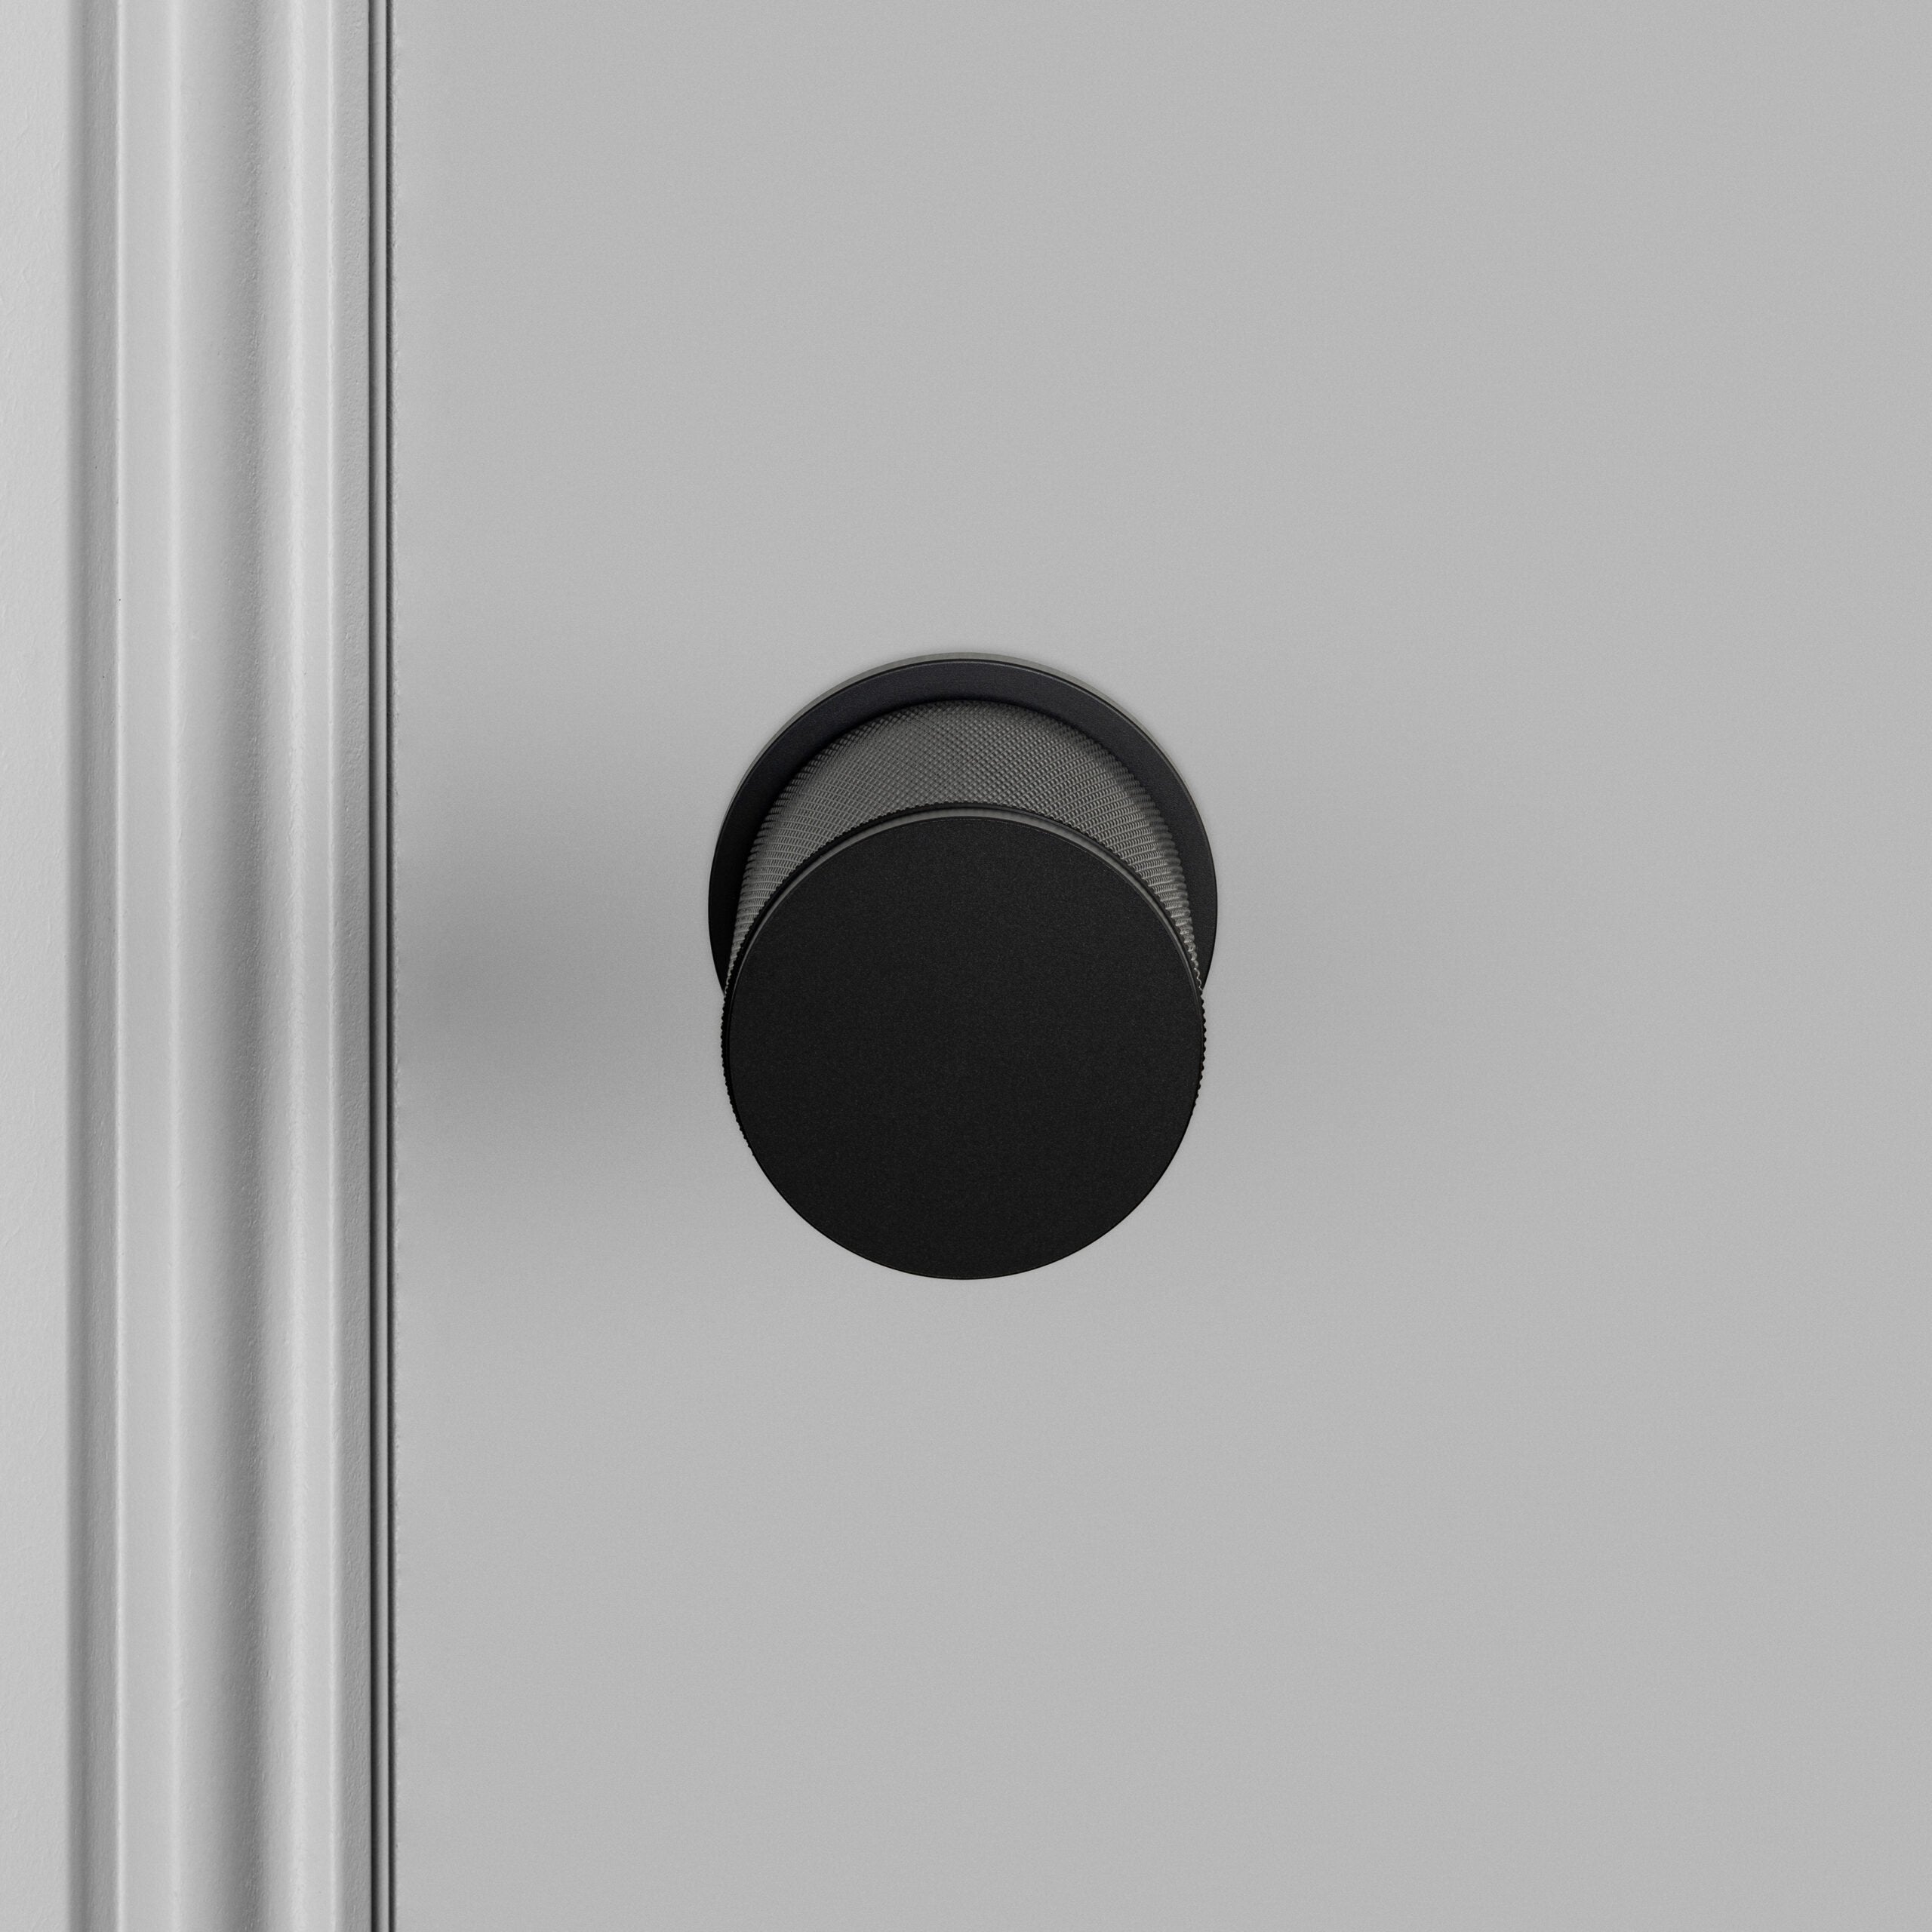 Buster + Punch Door Knob Double Sided, Cross Design, FIXED TYPE Hardware Buster + Punch Black  